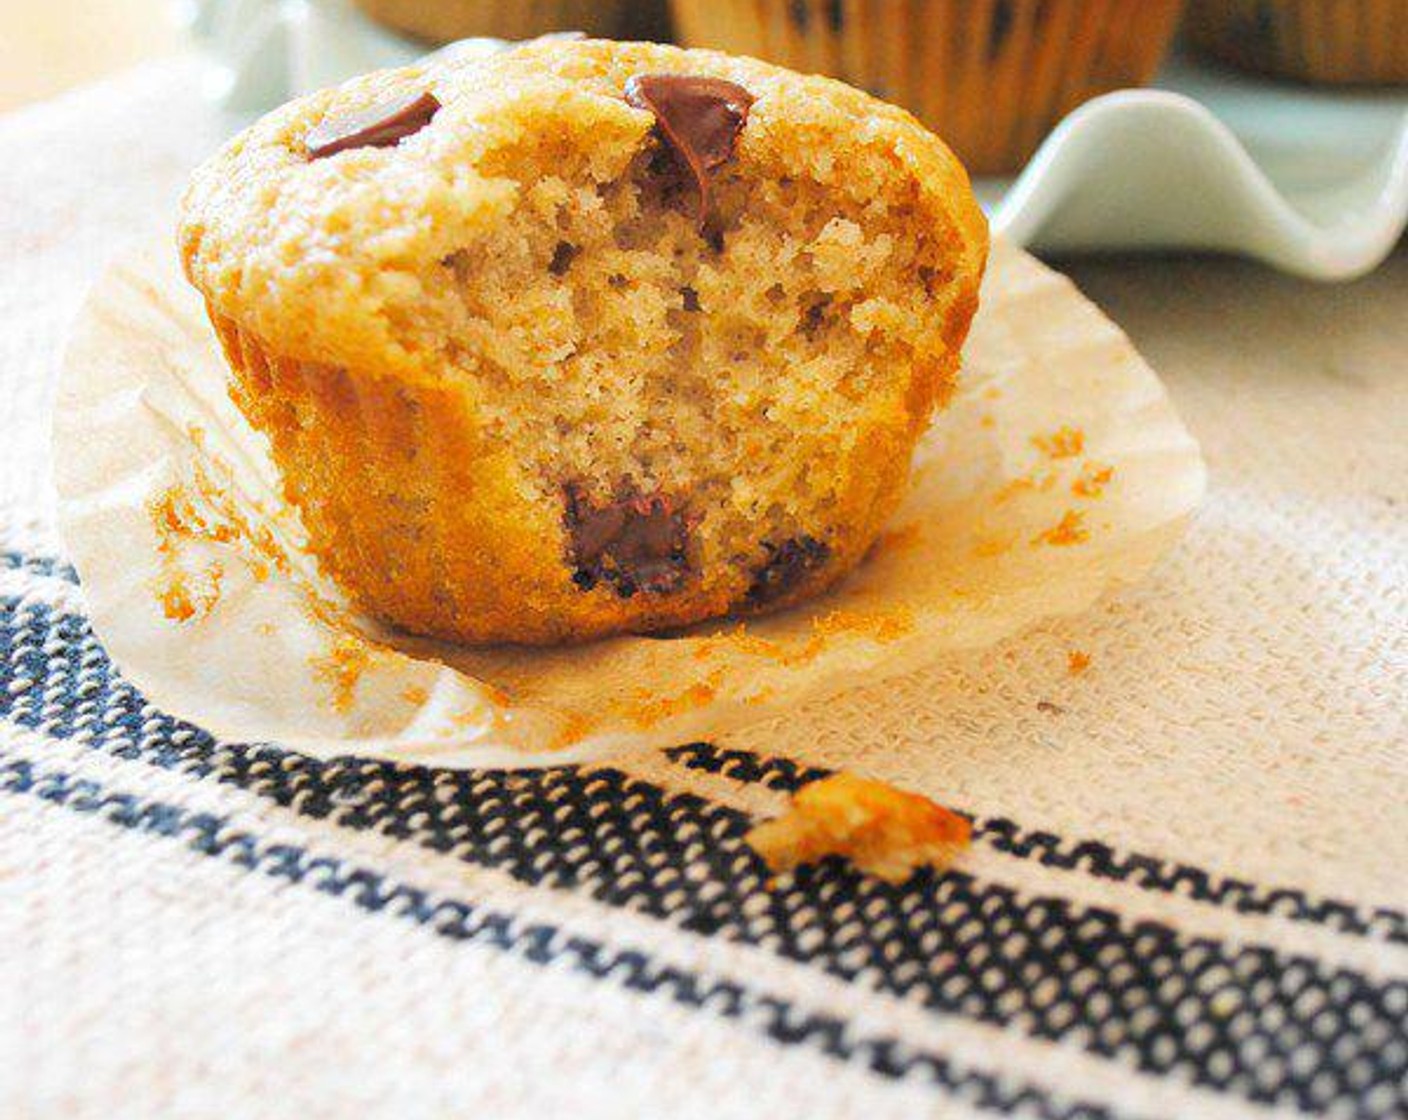 step 6 Bake the muffins for 20 minutes or until a toothpick inserted in the center comes out clean. Allow these to cool on a wire rack for at least 5 minutes. Store in an air tight container after they completely cool.